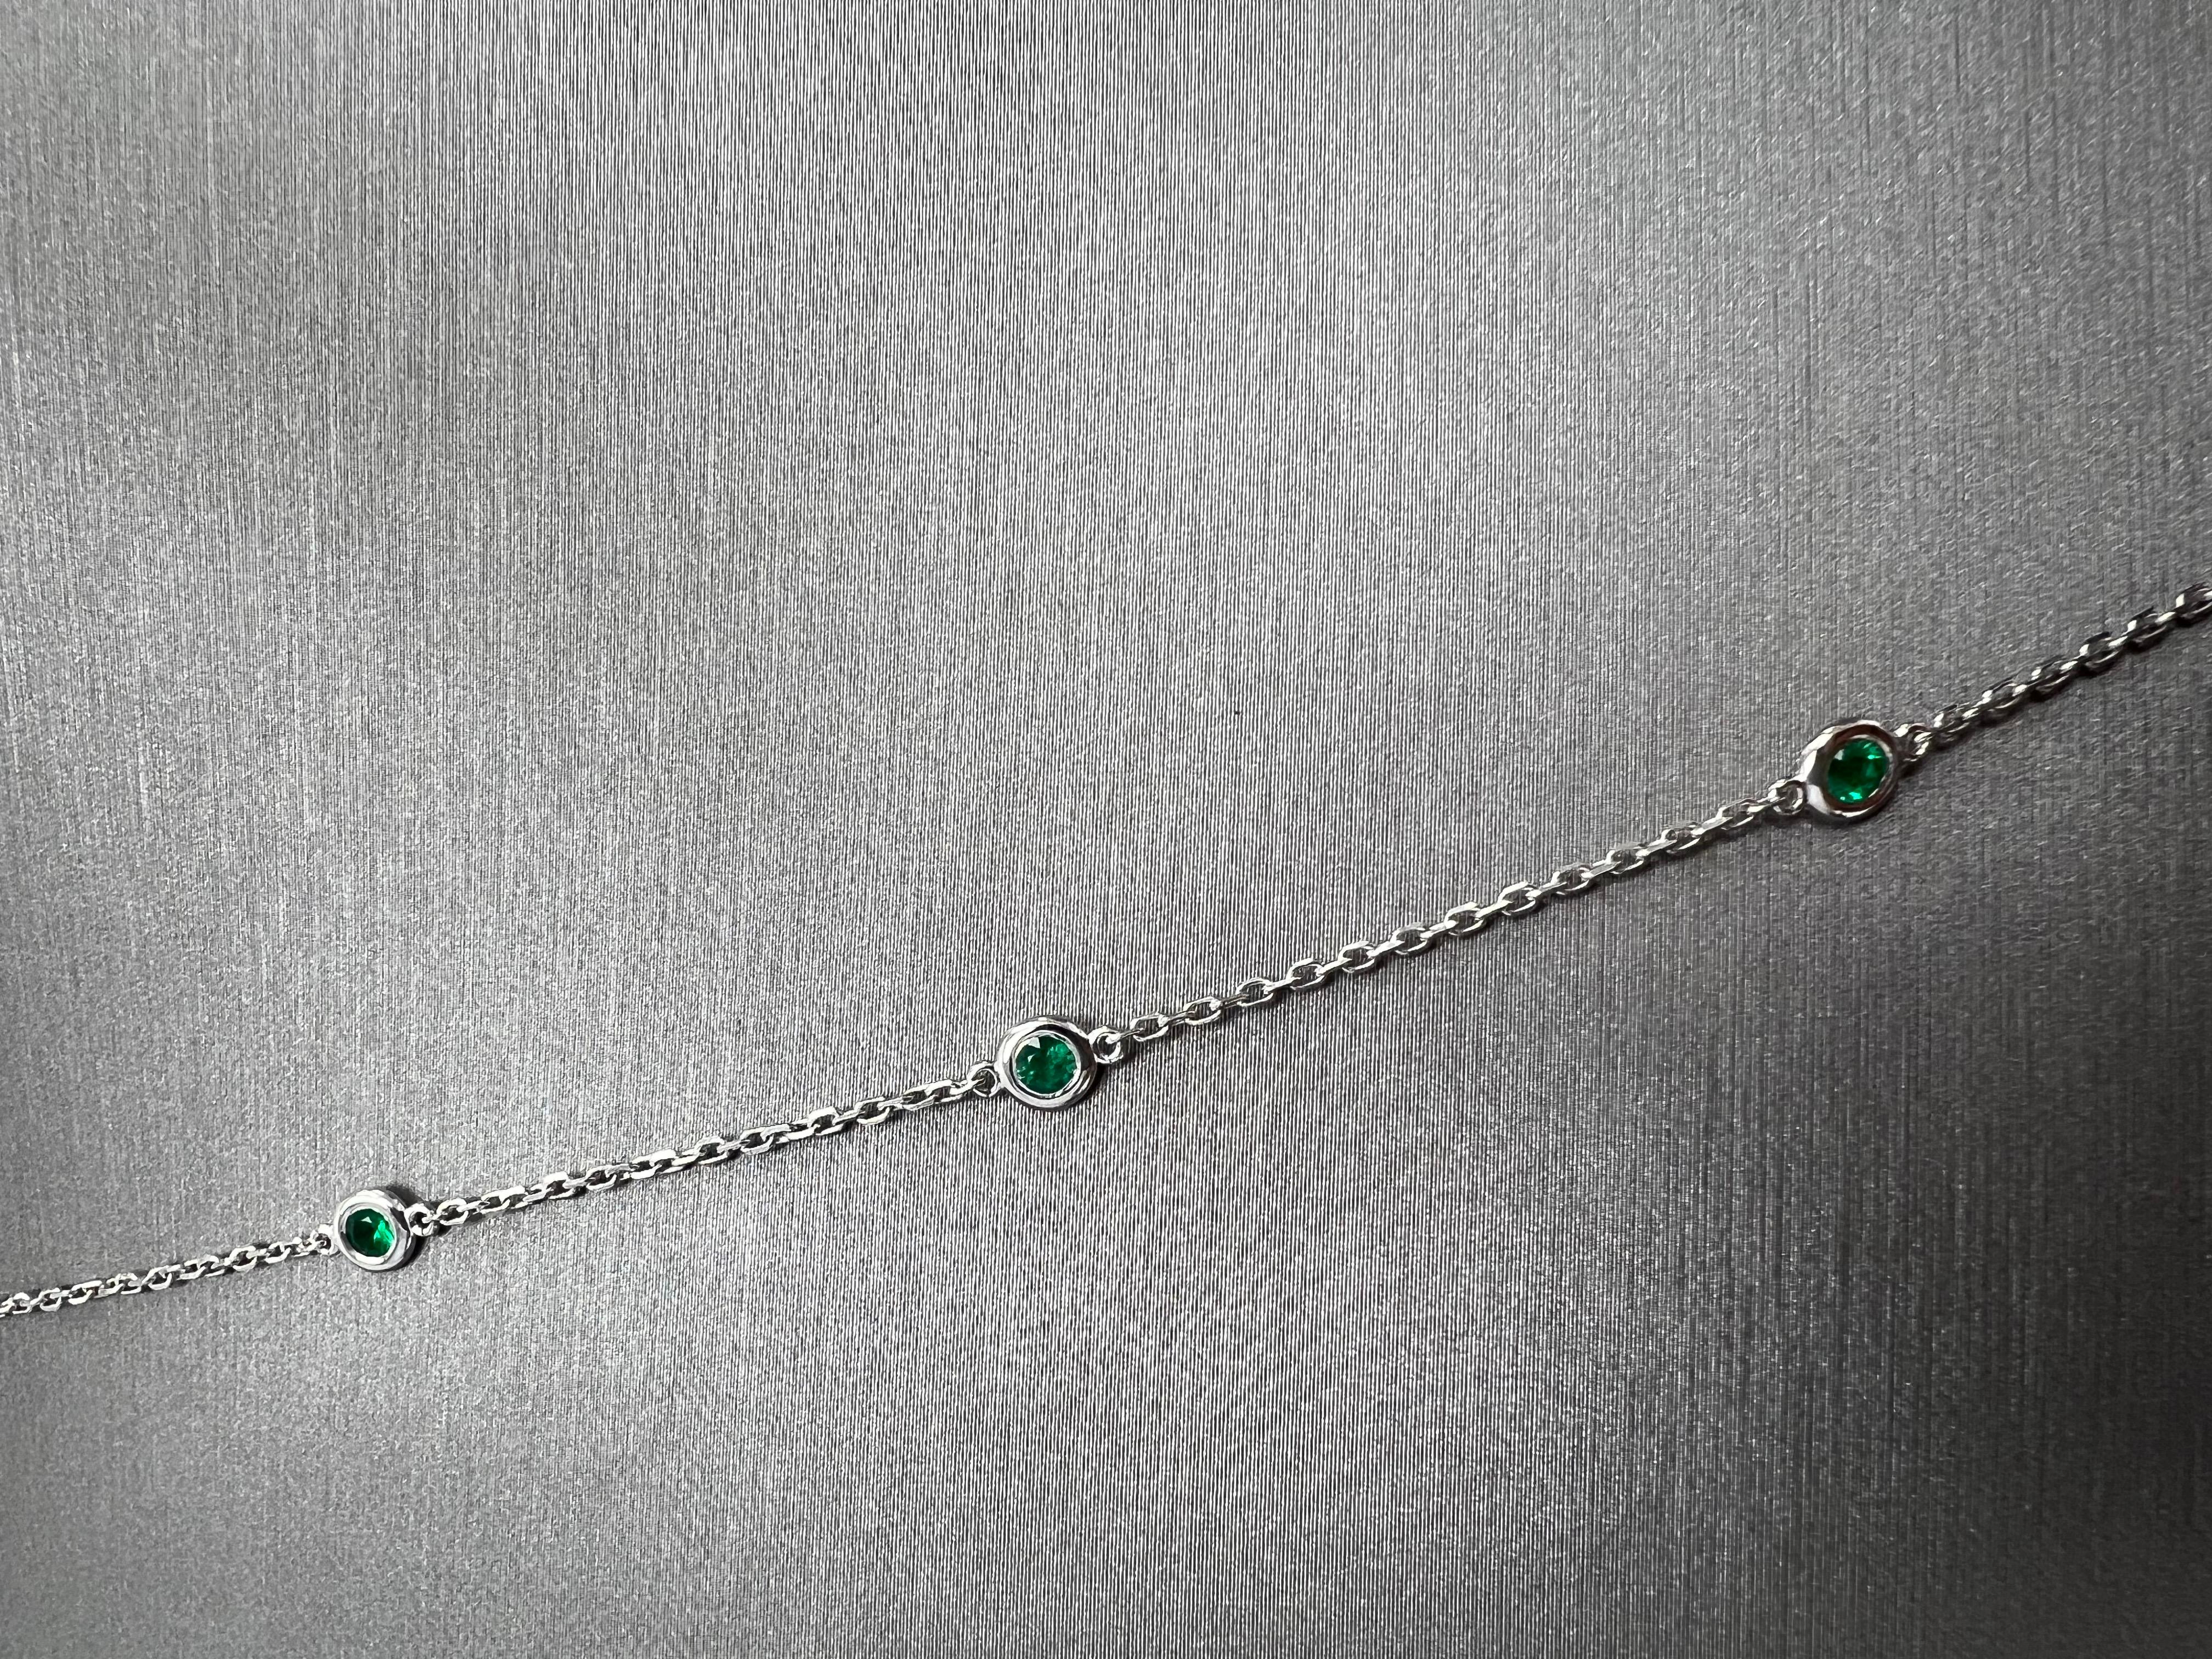 Brilliant Cut Diamonds by The Yard Chain Necklace in 14k White with Natural Emerald Gem-stones For Sale